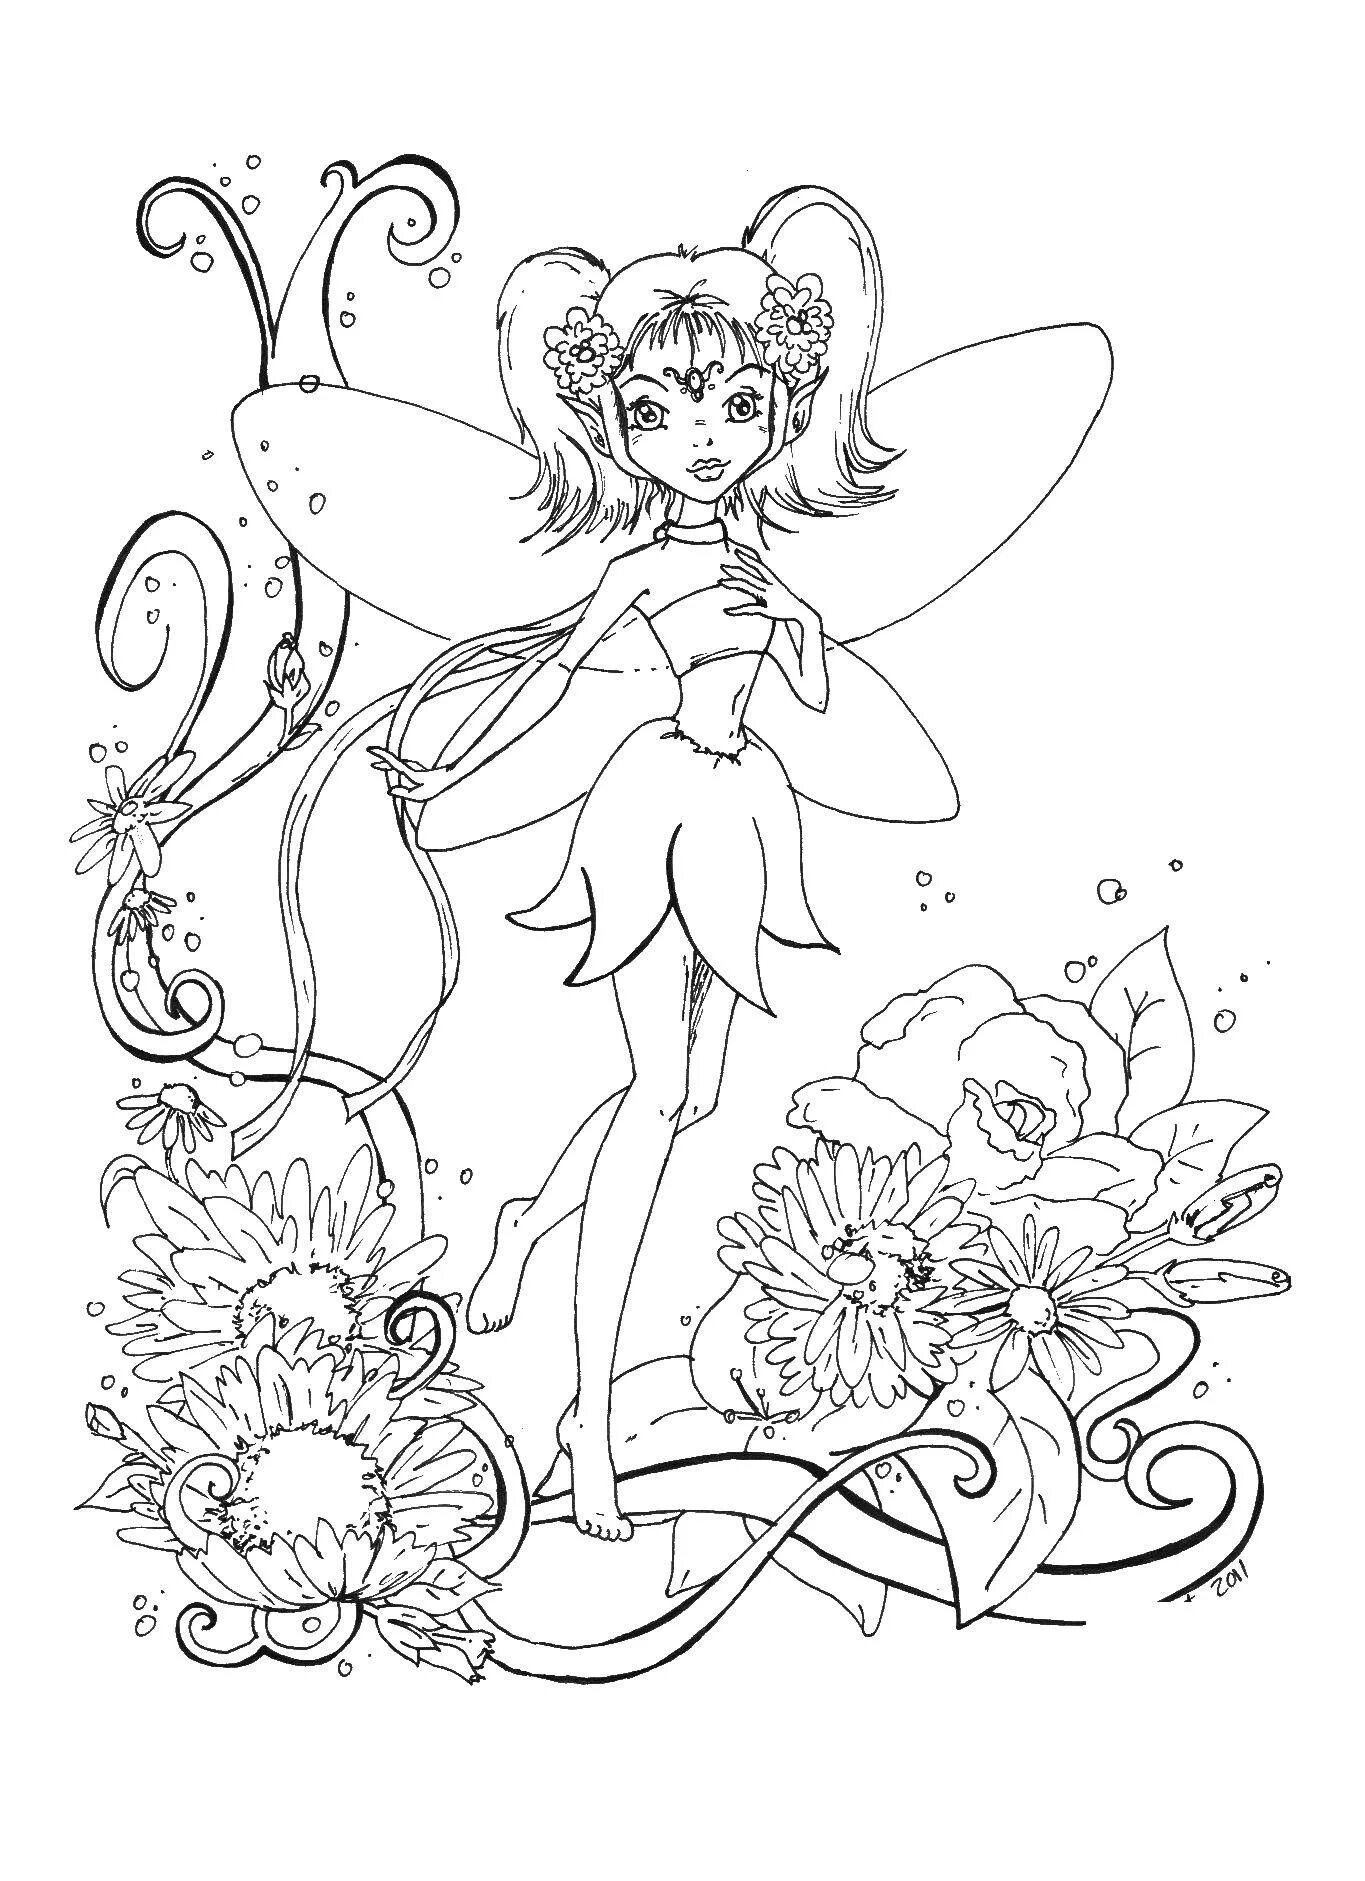 Coloring fairy of the divine forest